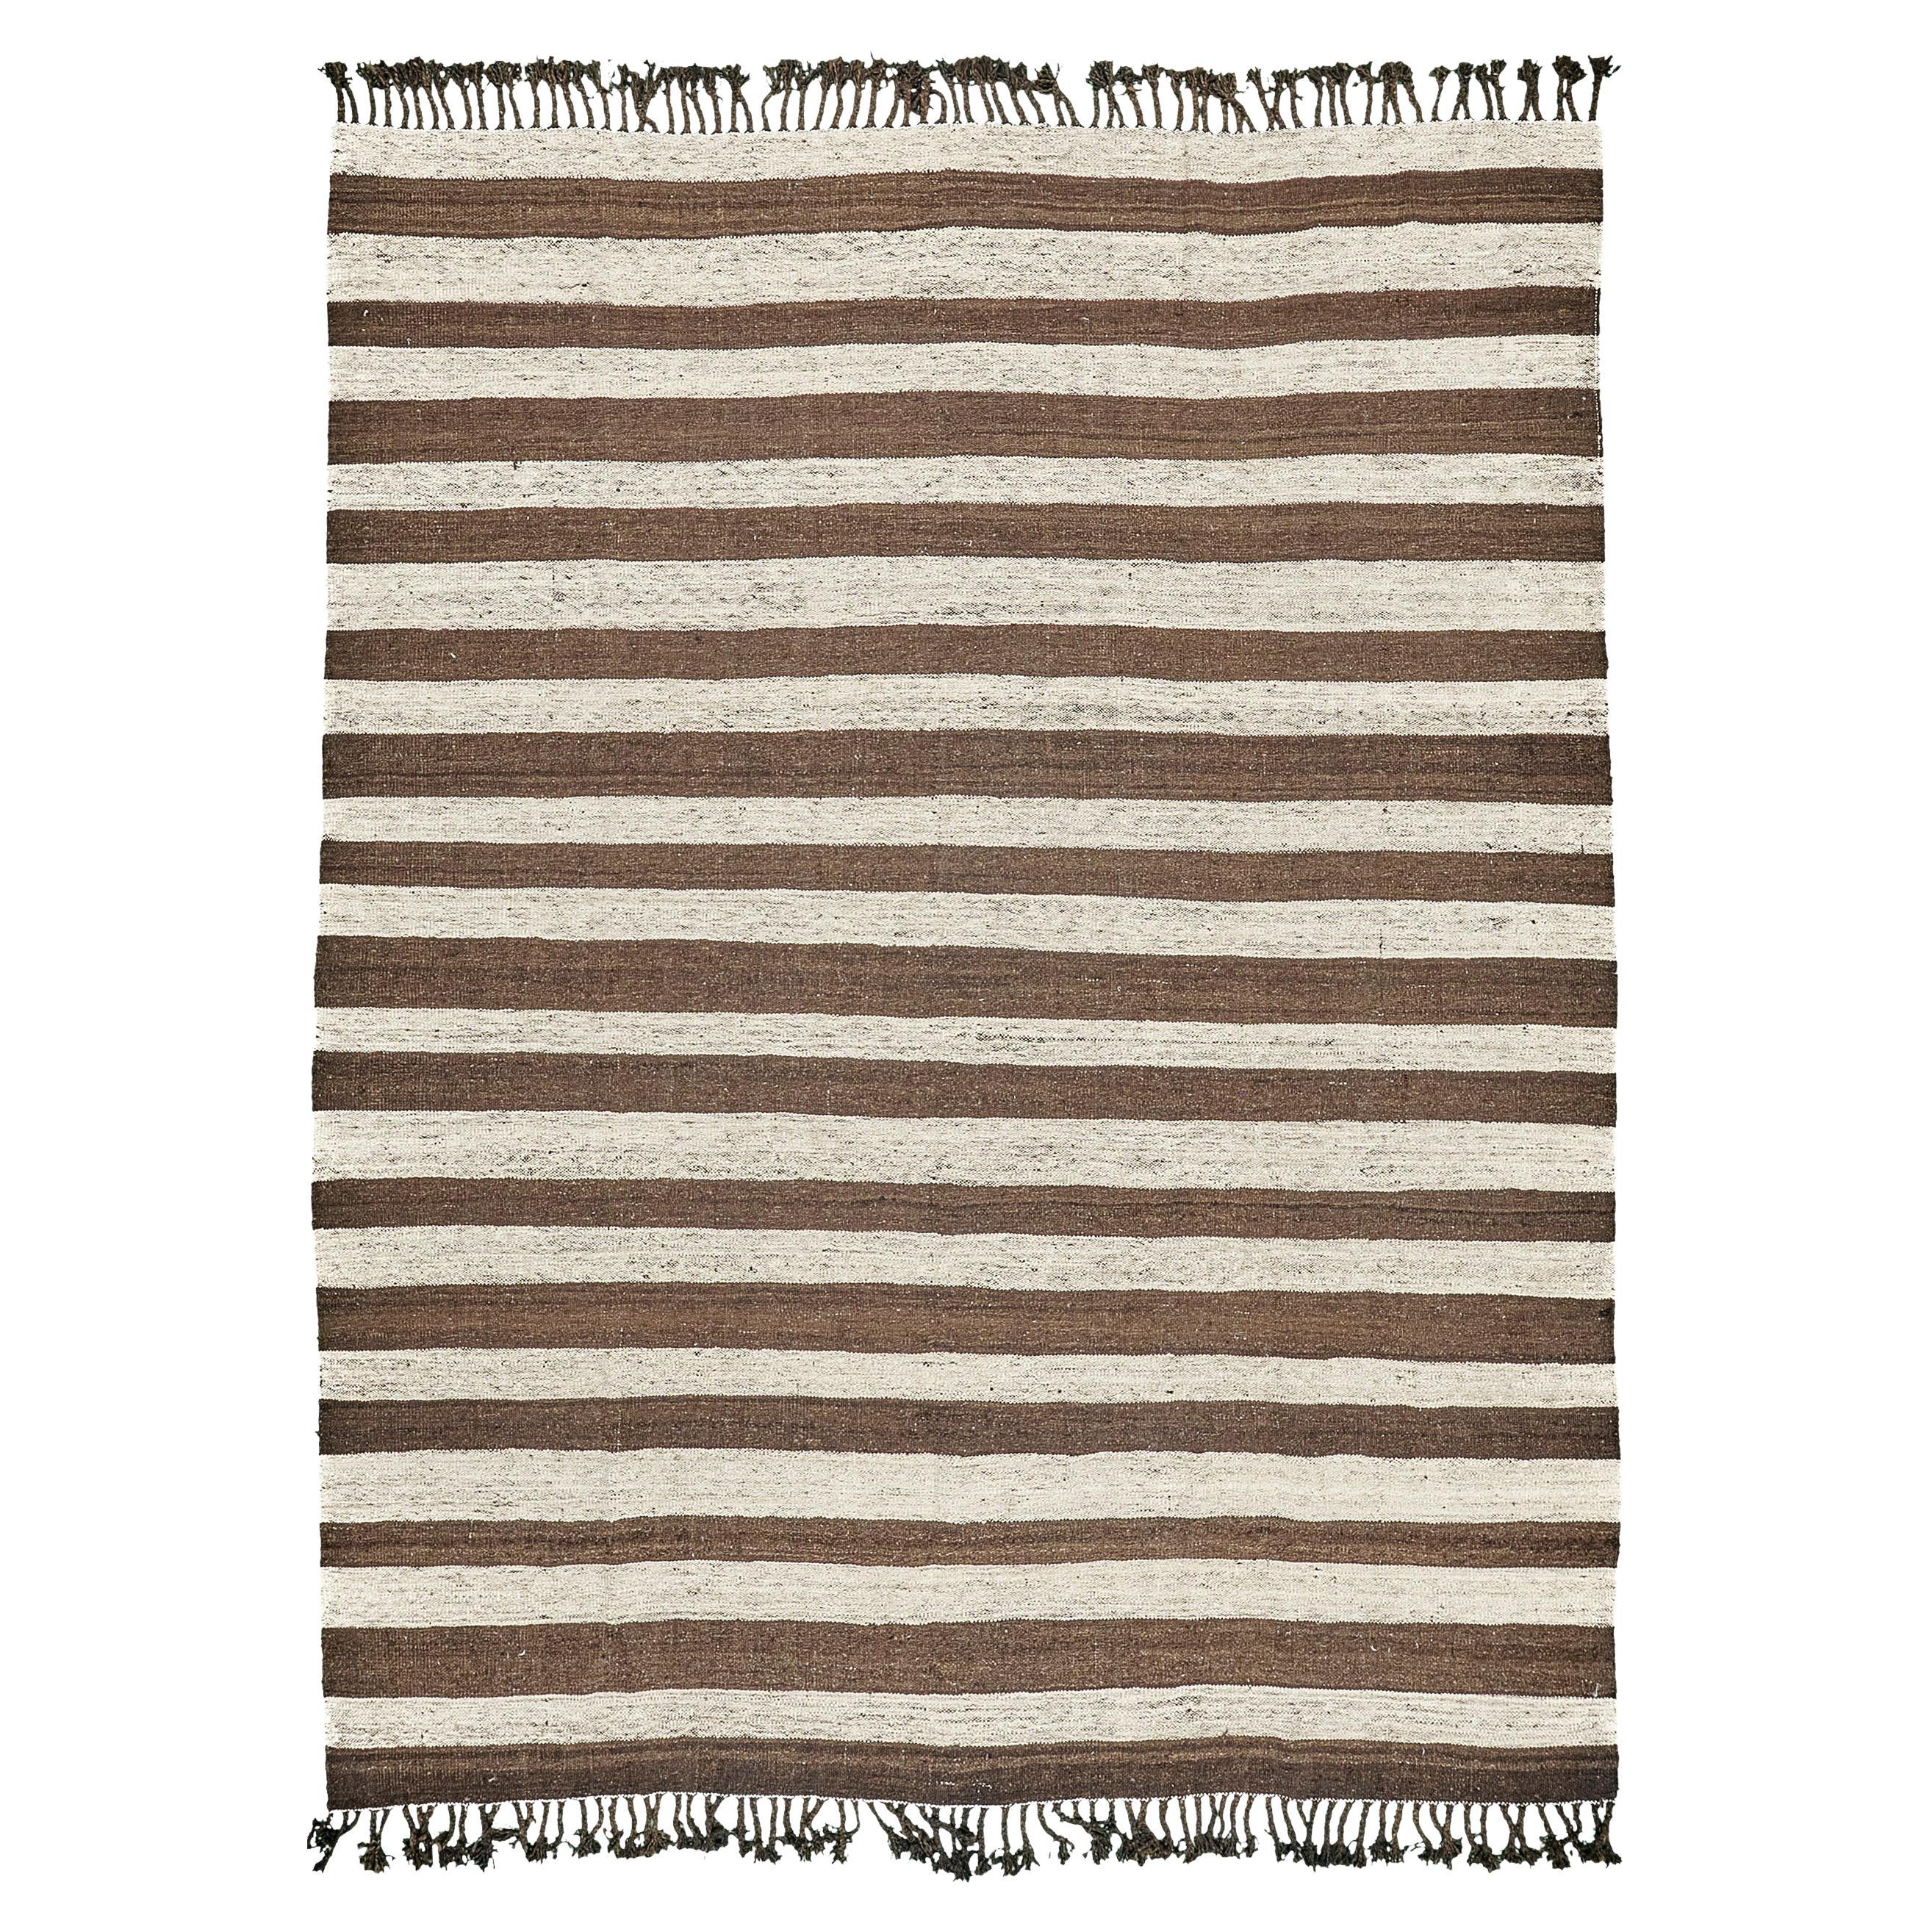 Natural Dye Flat Weave Kilim from Mehraban For Sale